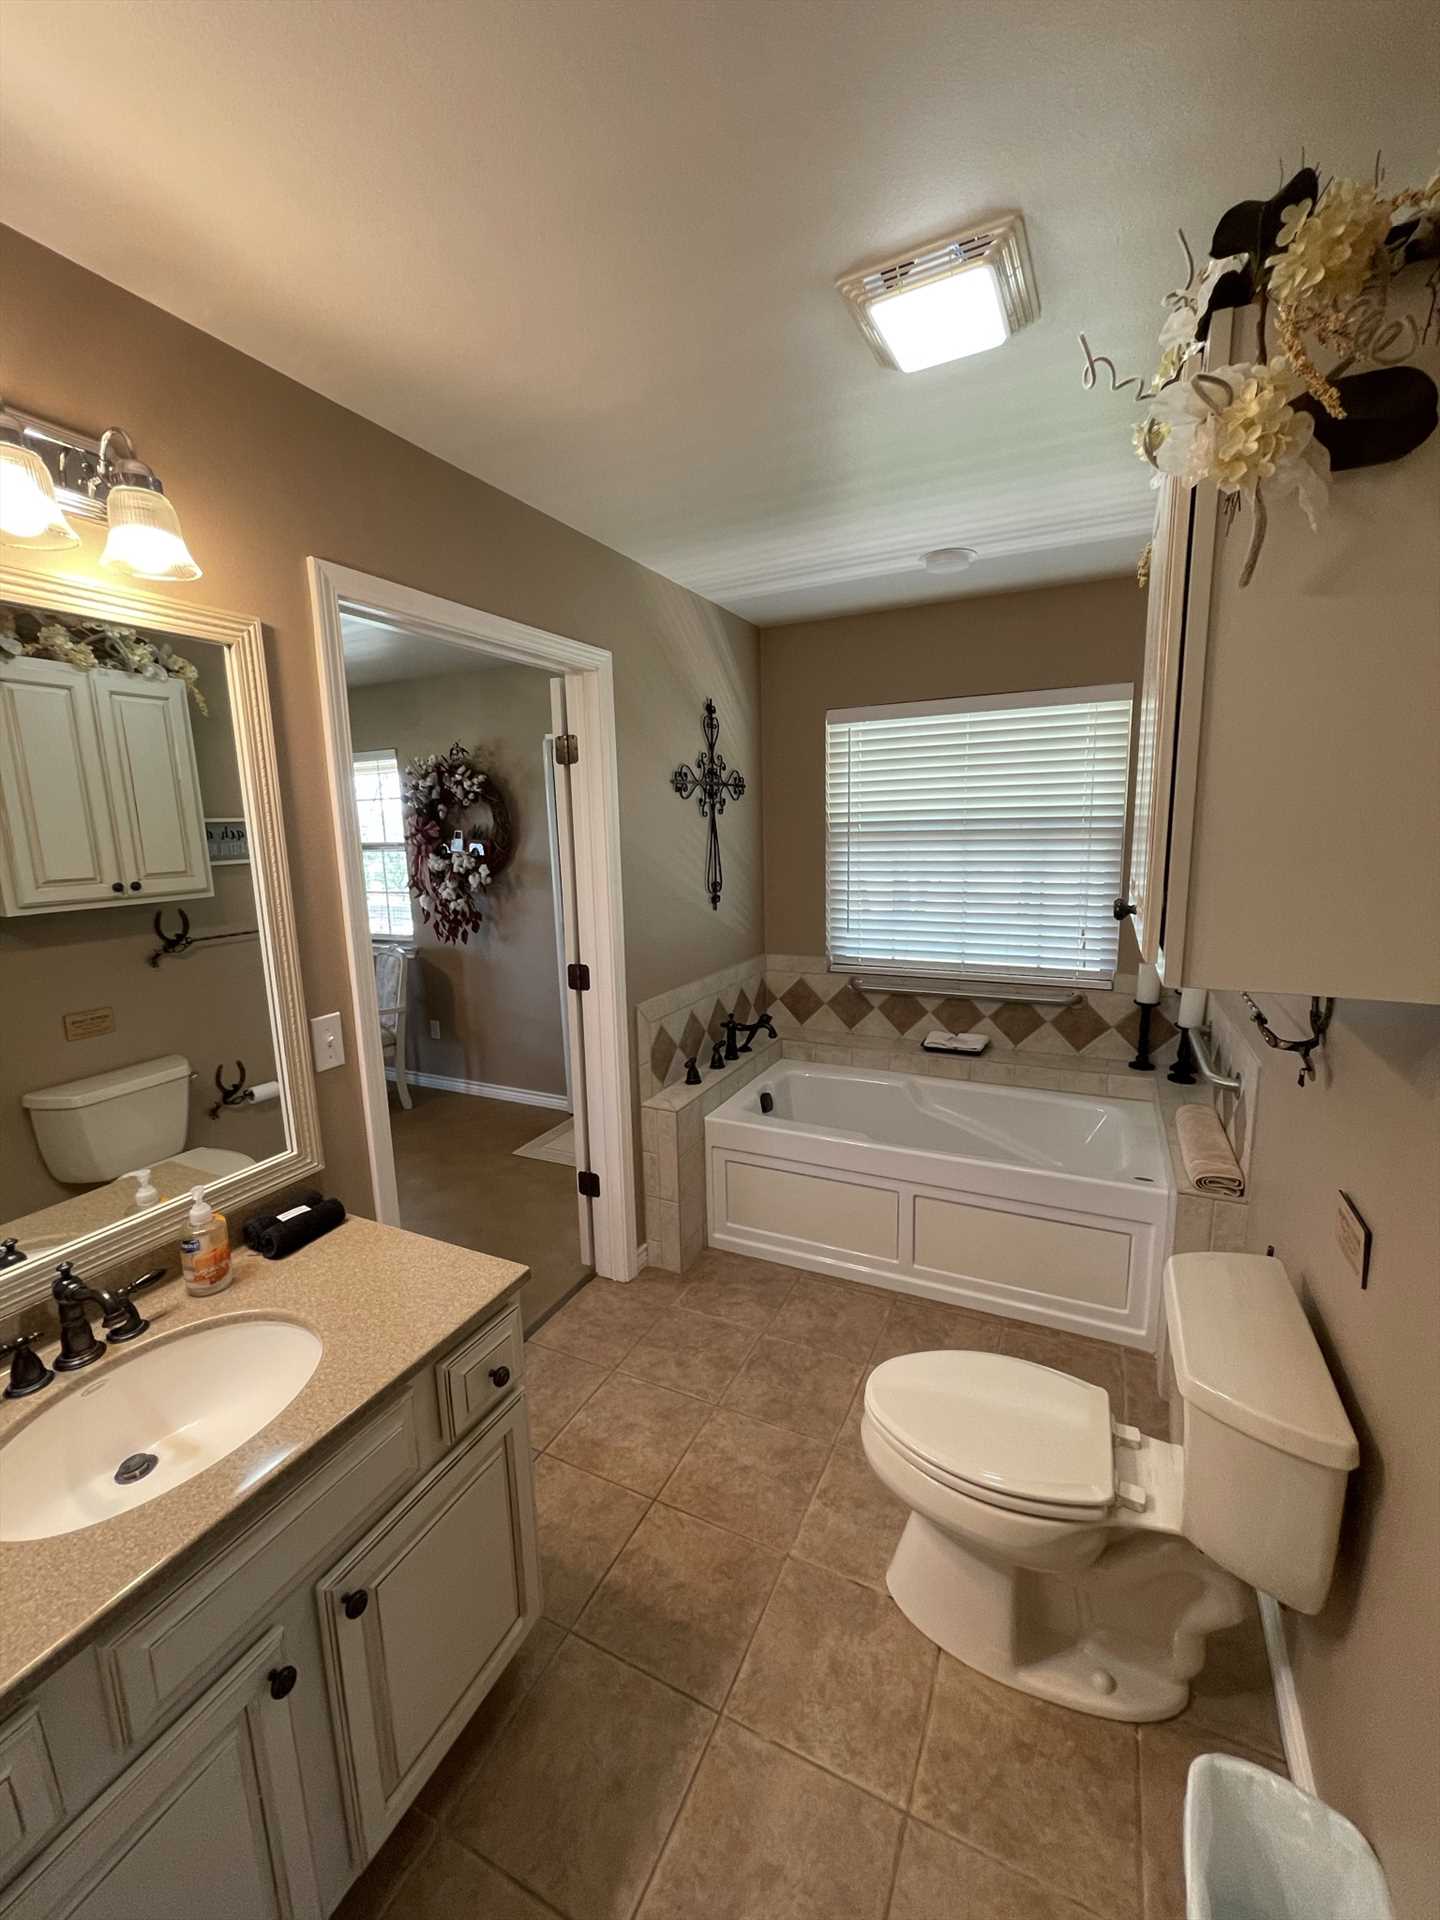                                                 This immaculately clean bathroom features a roomy tub to soak in, and a vanity with plenty of counter space. Clean bath linens are included as part of your stay!